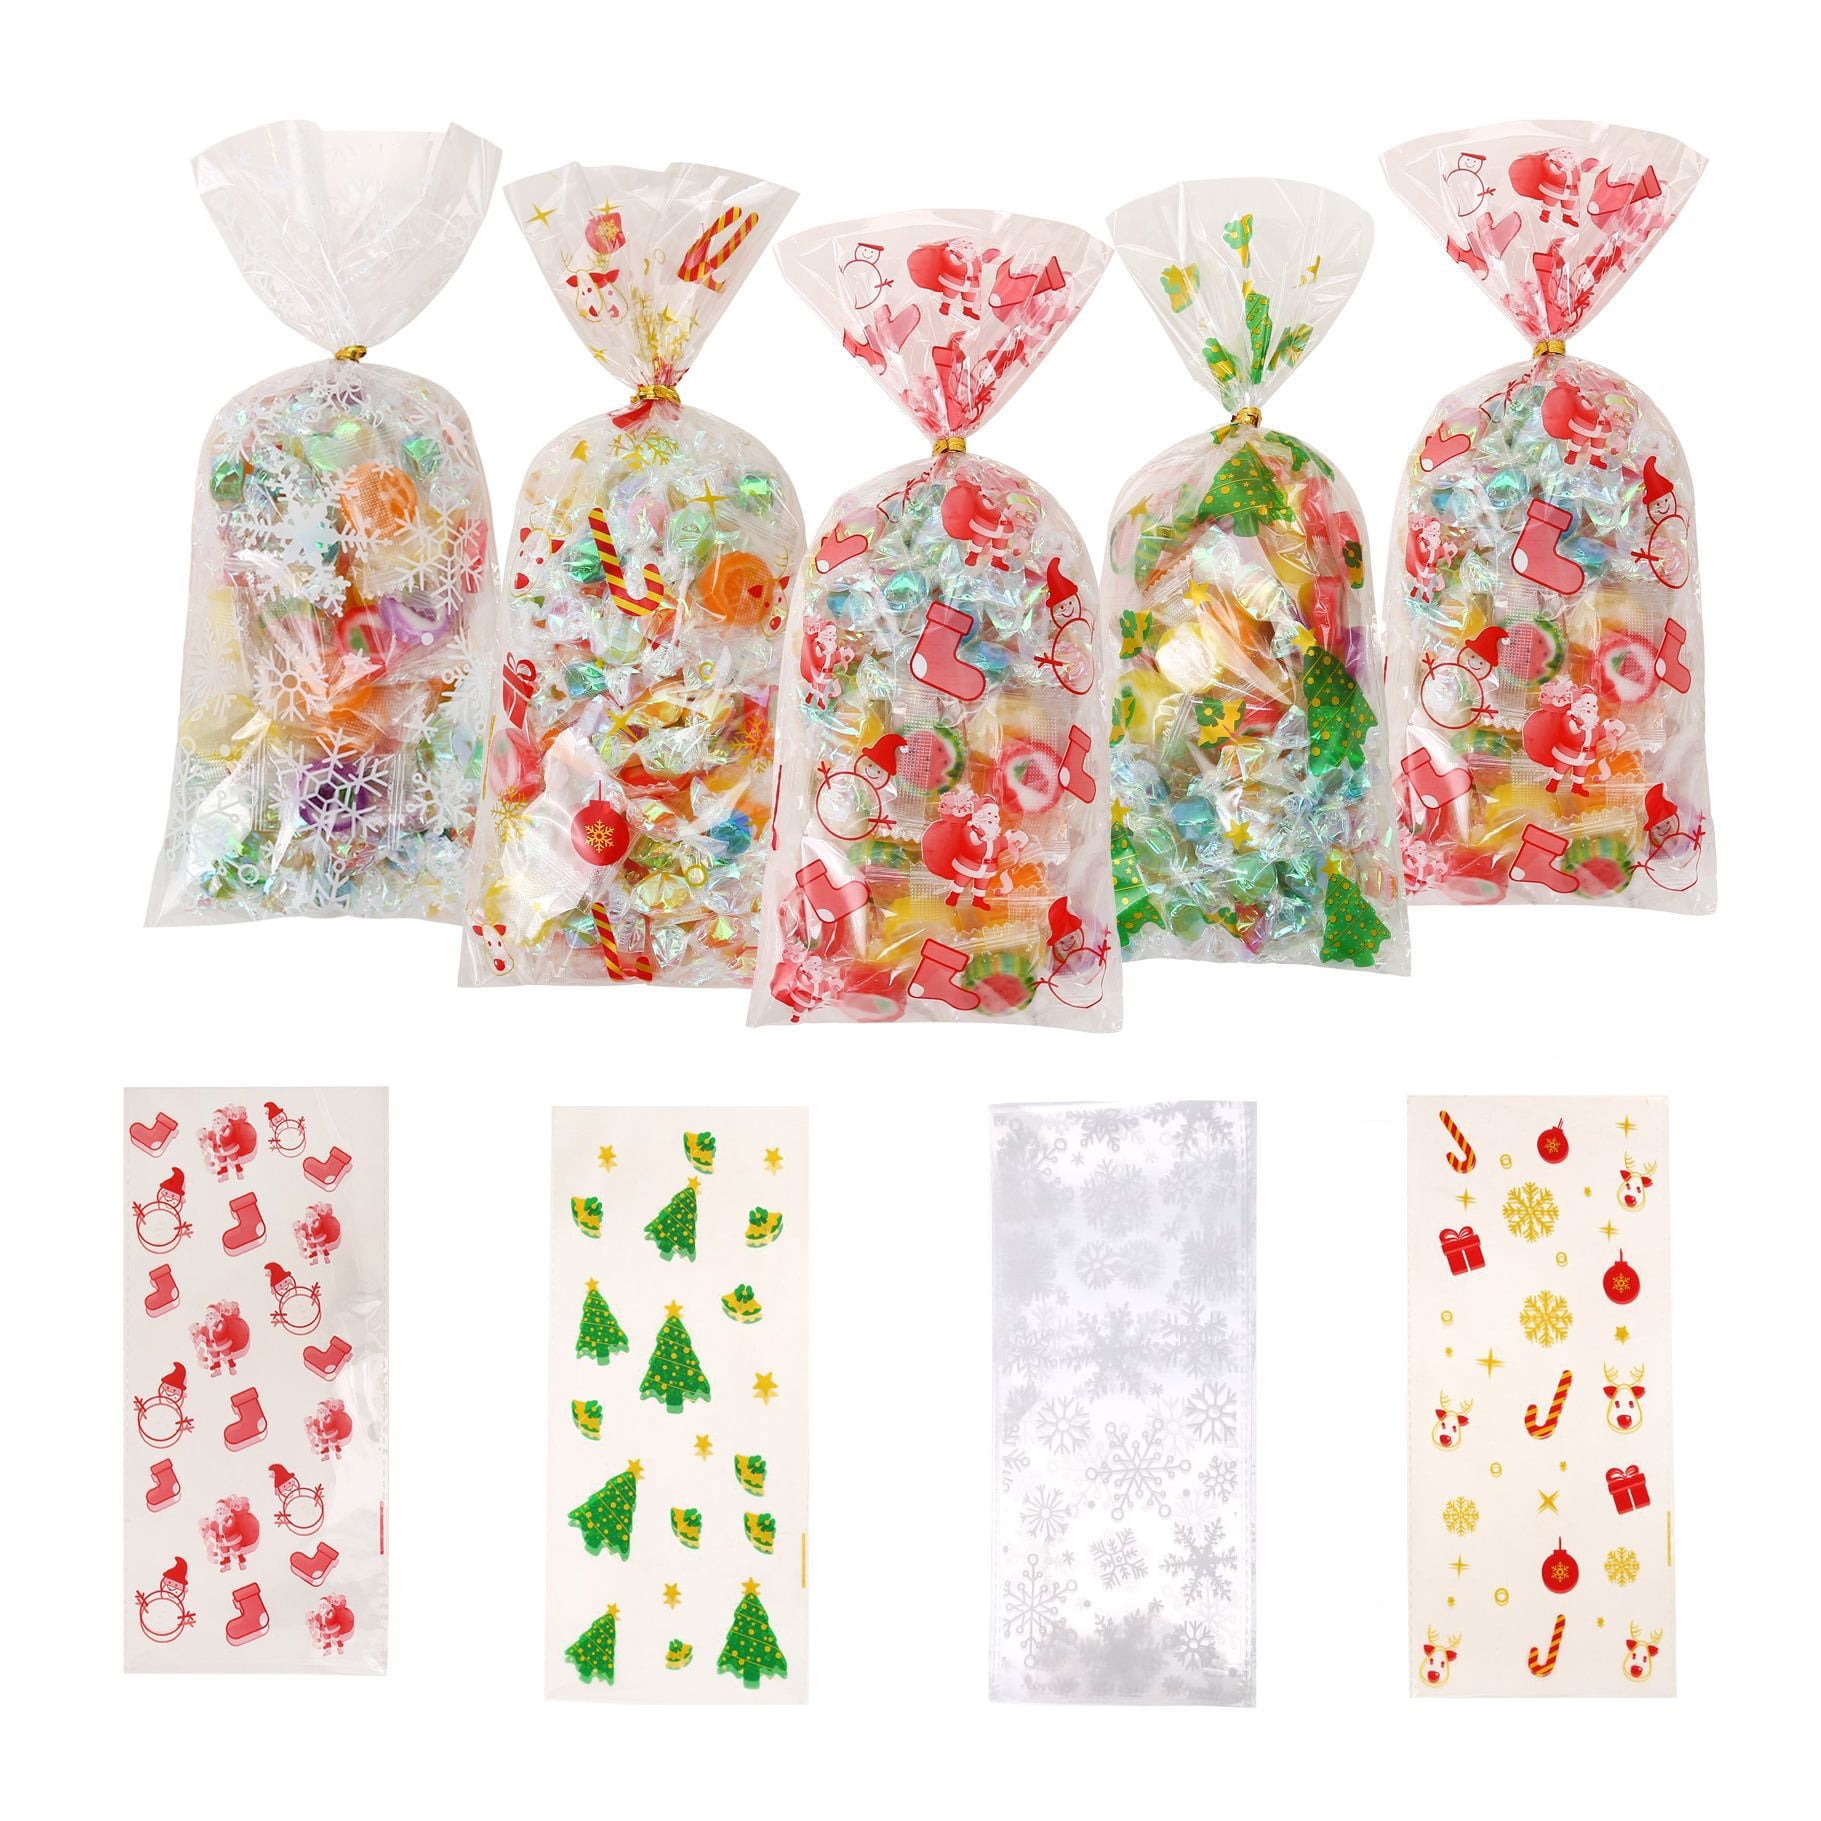 6 x TREAT SWEET CHOCOLATE BAGS WITH TIES Clear Gold Christmas XMAS 